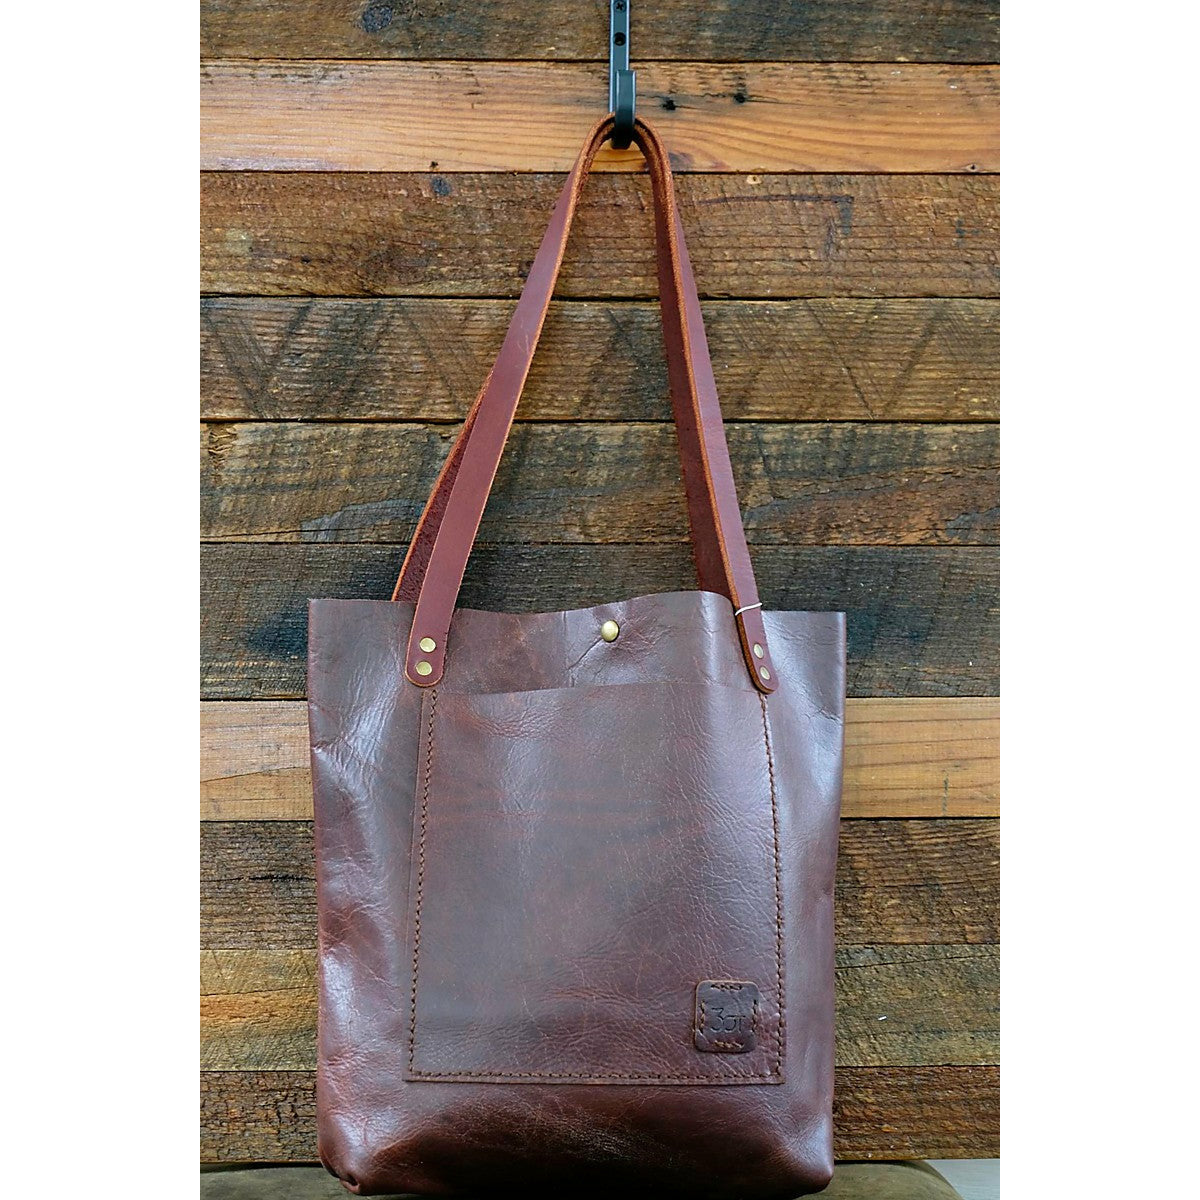 tote, totes, leather tote